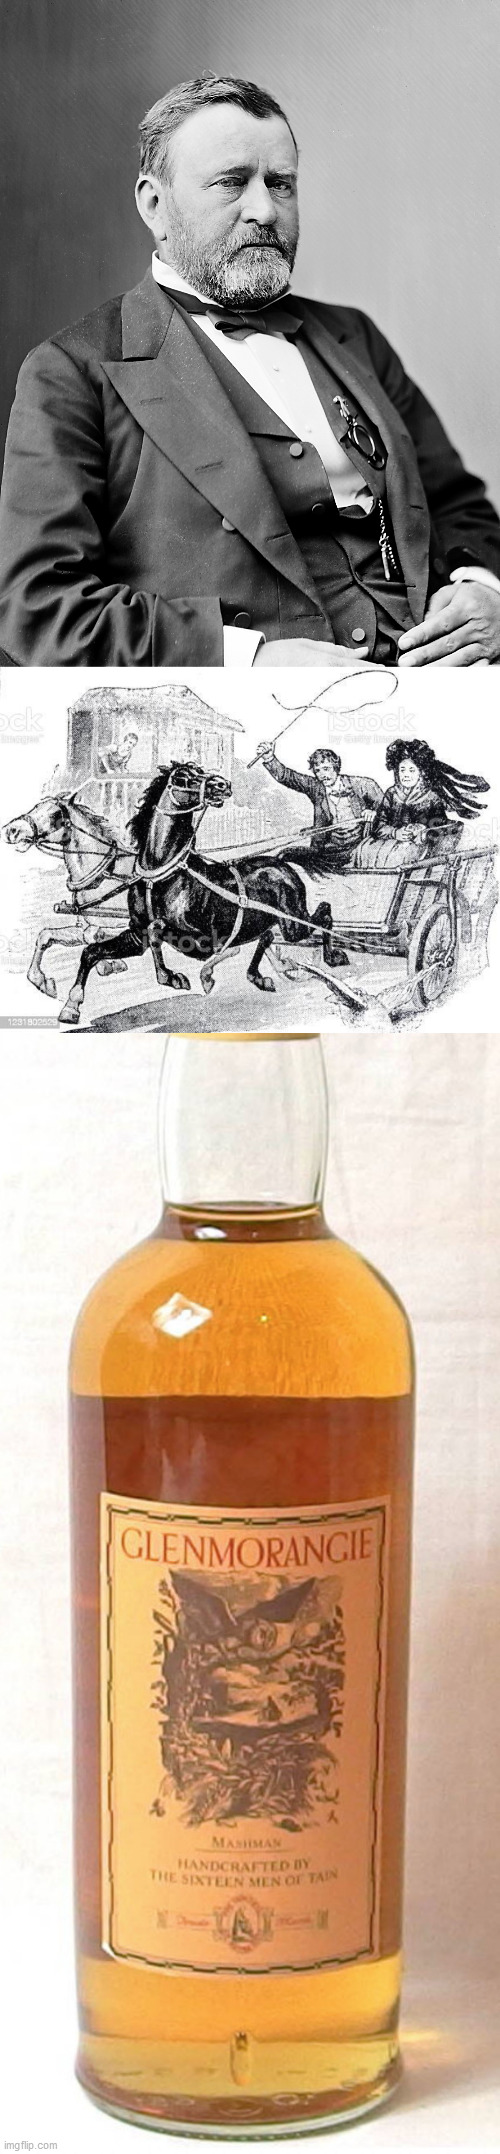 image tagged in ulysses s grant,whiskey bottle | made w/ Imgflip meme maker